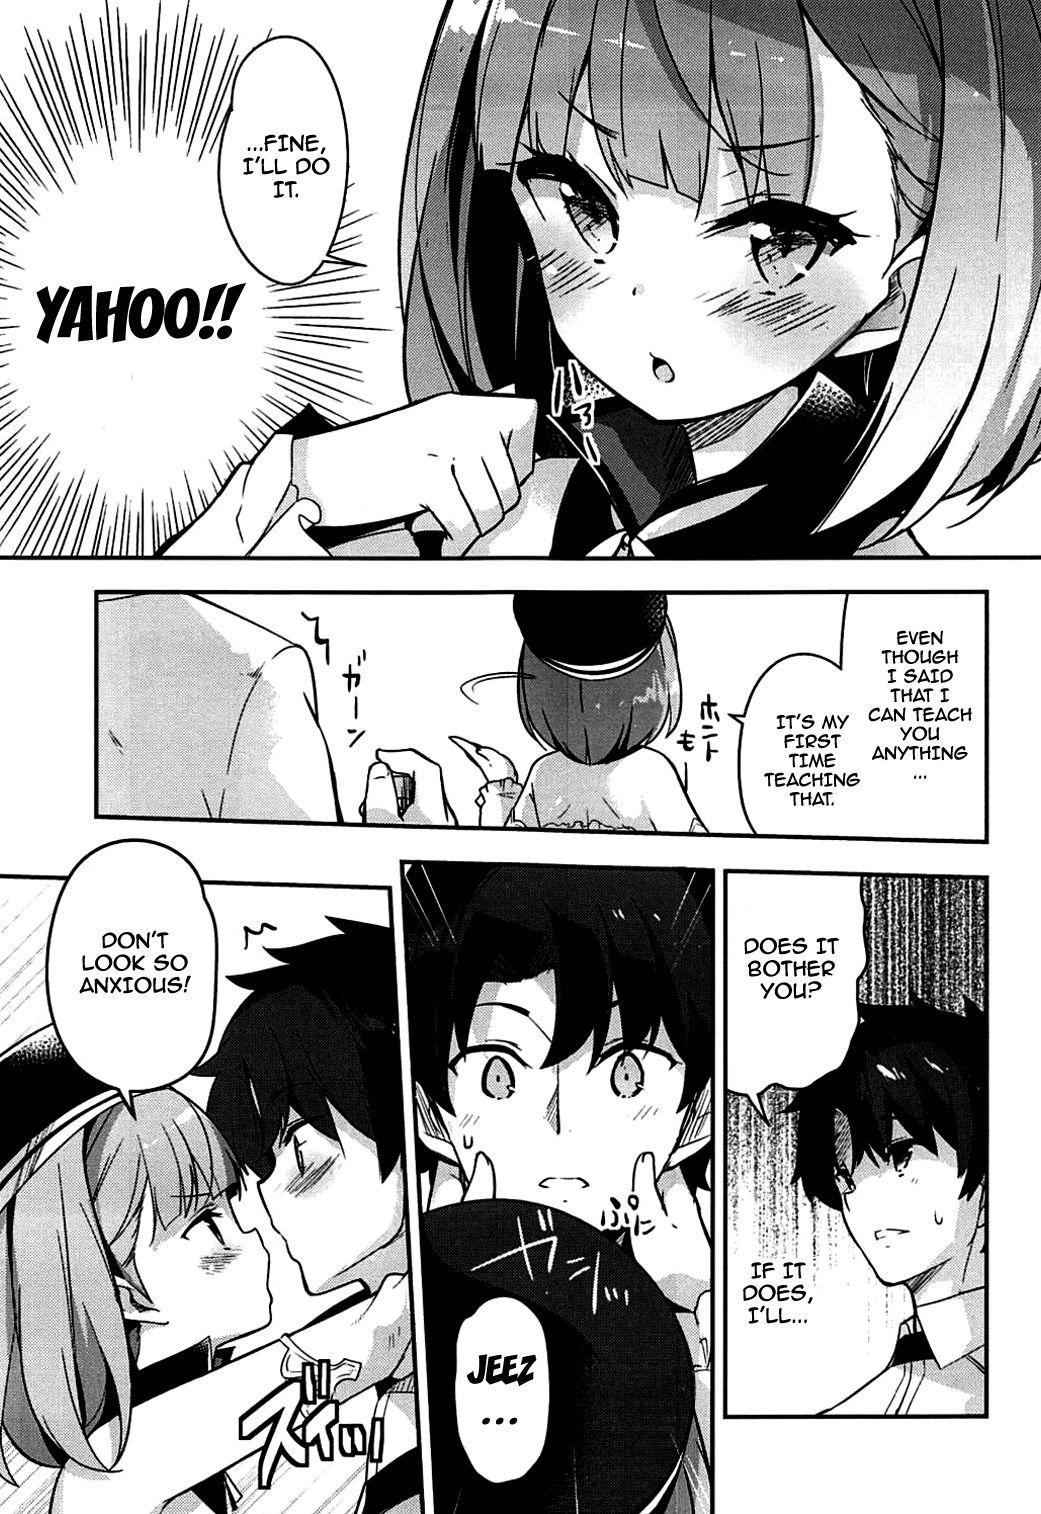 Free Oral Sex Nandemo to wa Itta kedo... | I Said We Could Do Whatever But... - Fate grand order Interracial Porn - Page 6